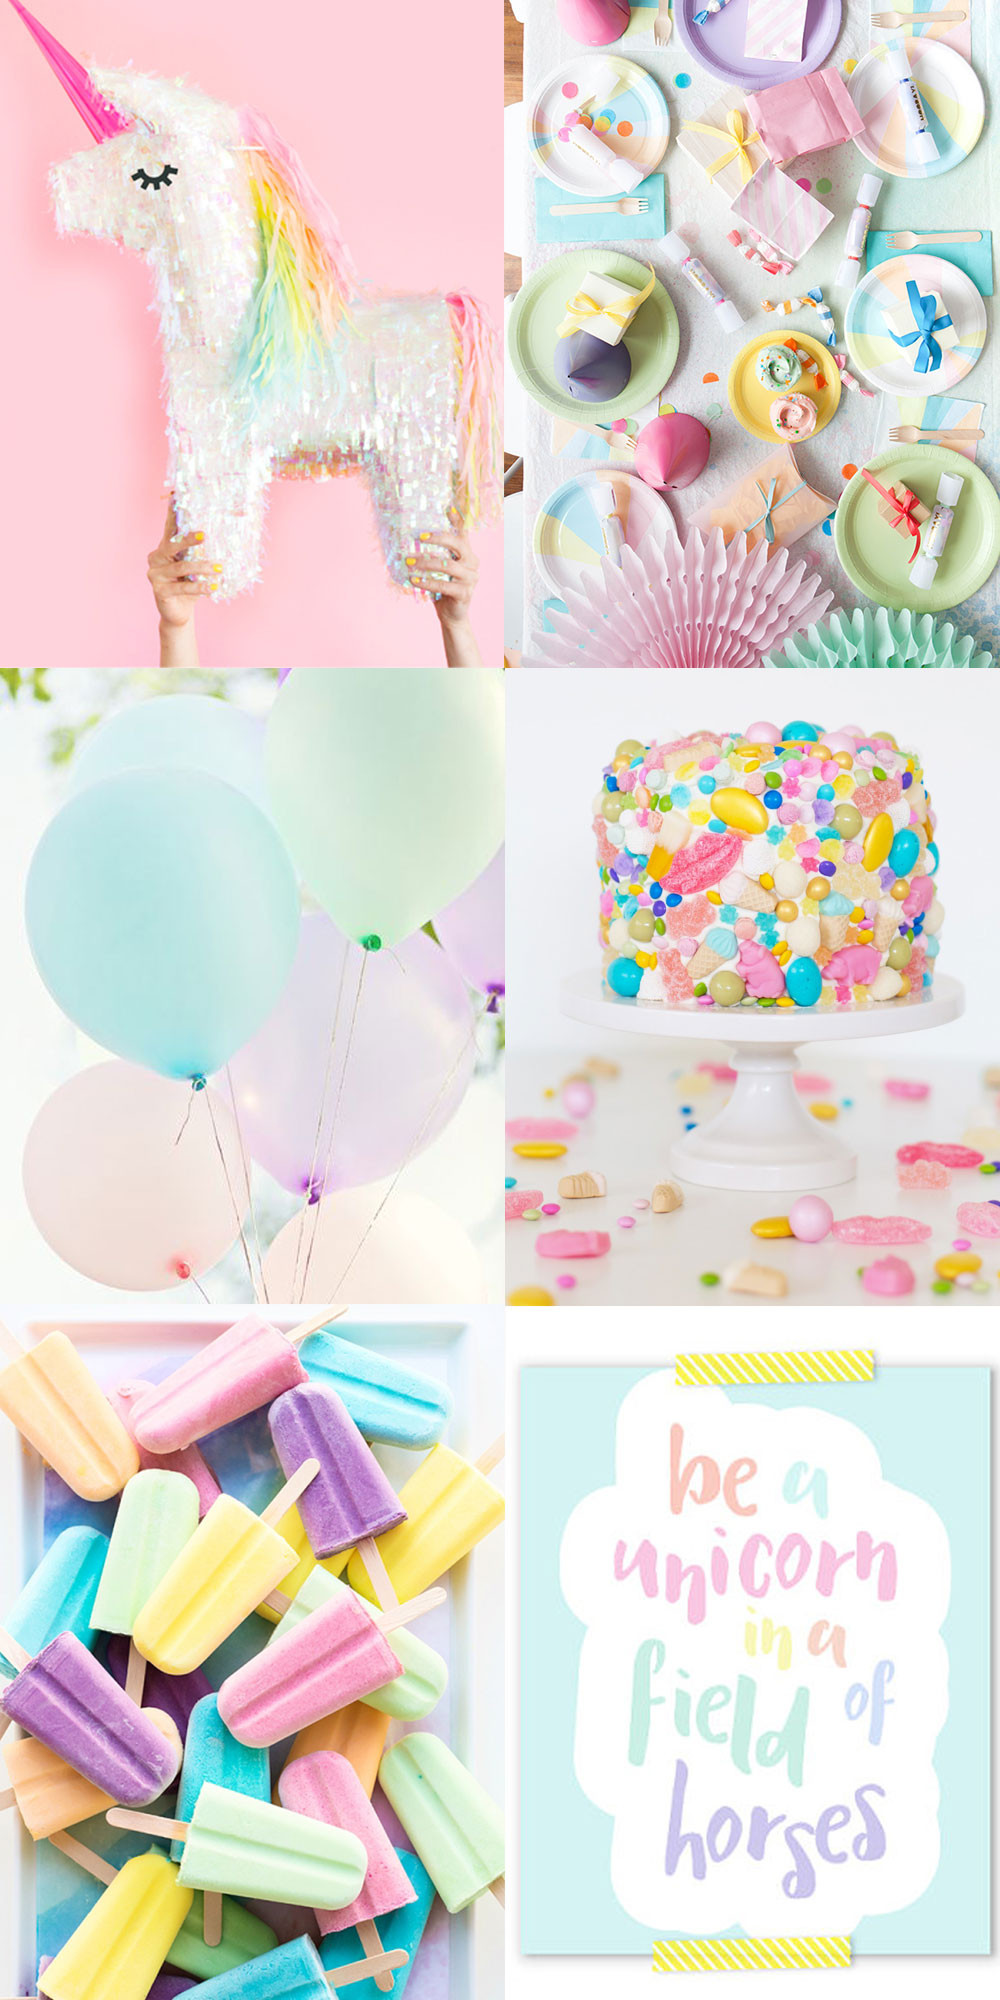 Unicorn Party Food Ideas Ponytails
 Tell Love and Party Page 2 of 57 Easy and Adorable DIY